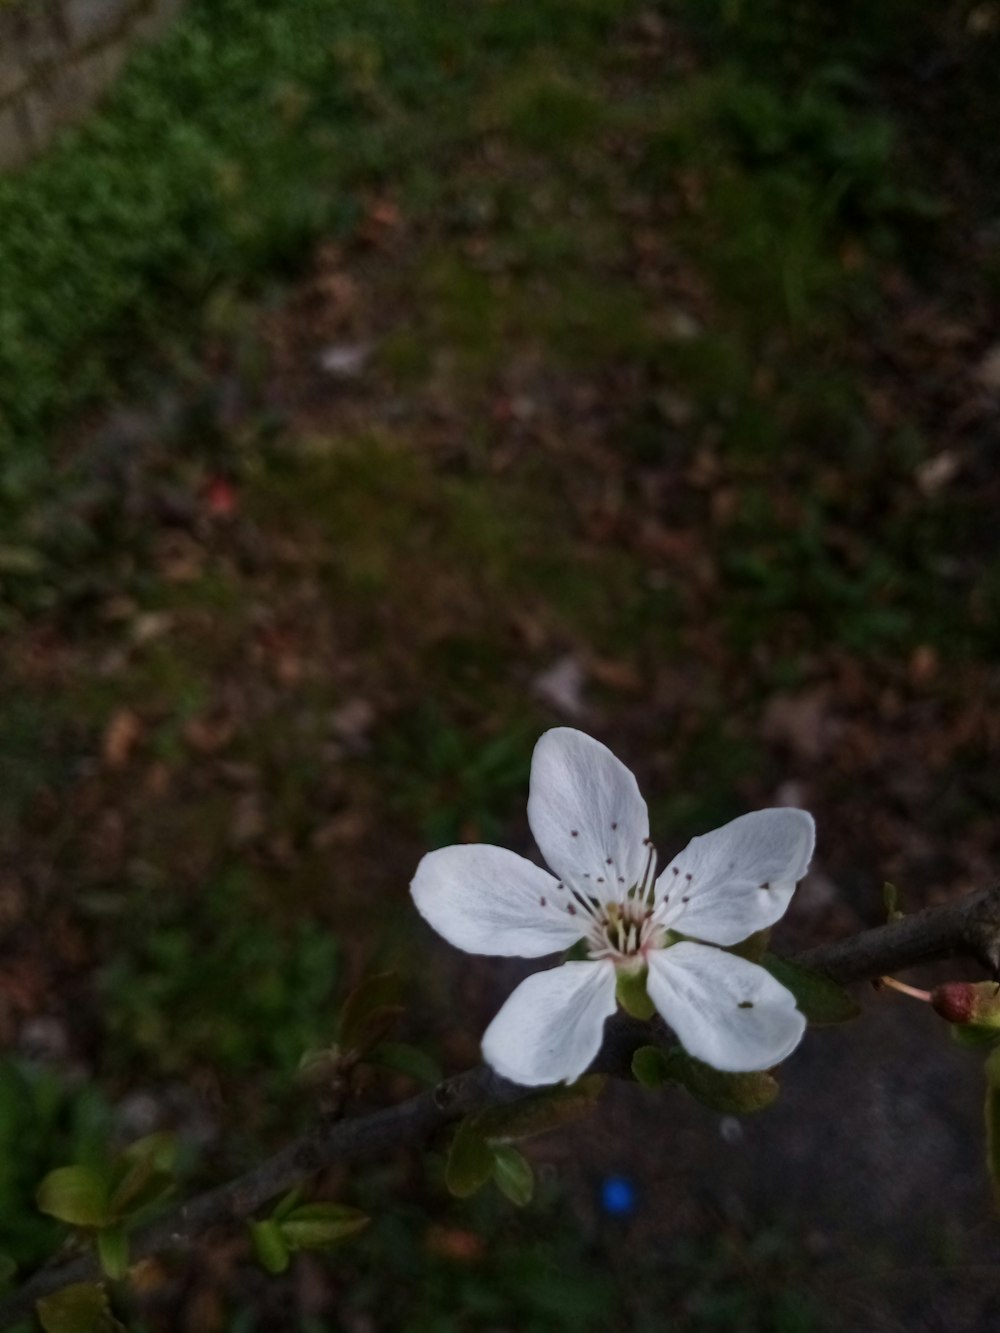 a small white flower on a tree branch